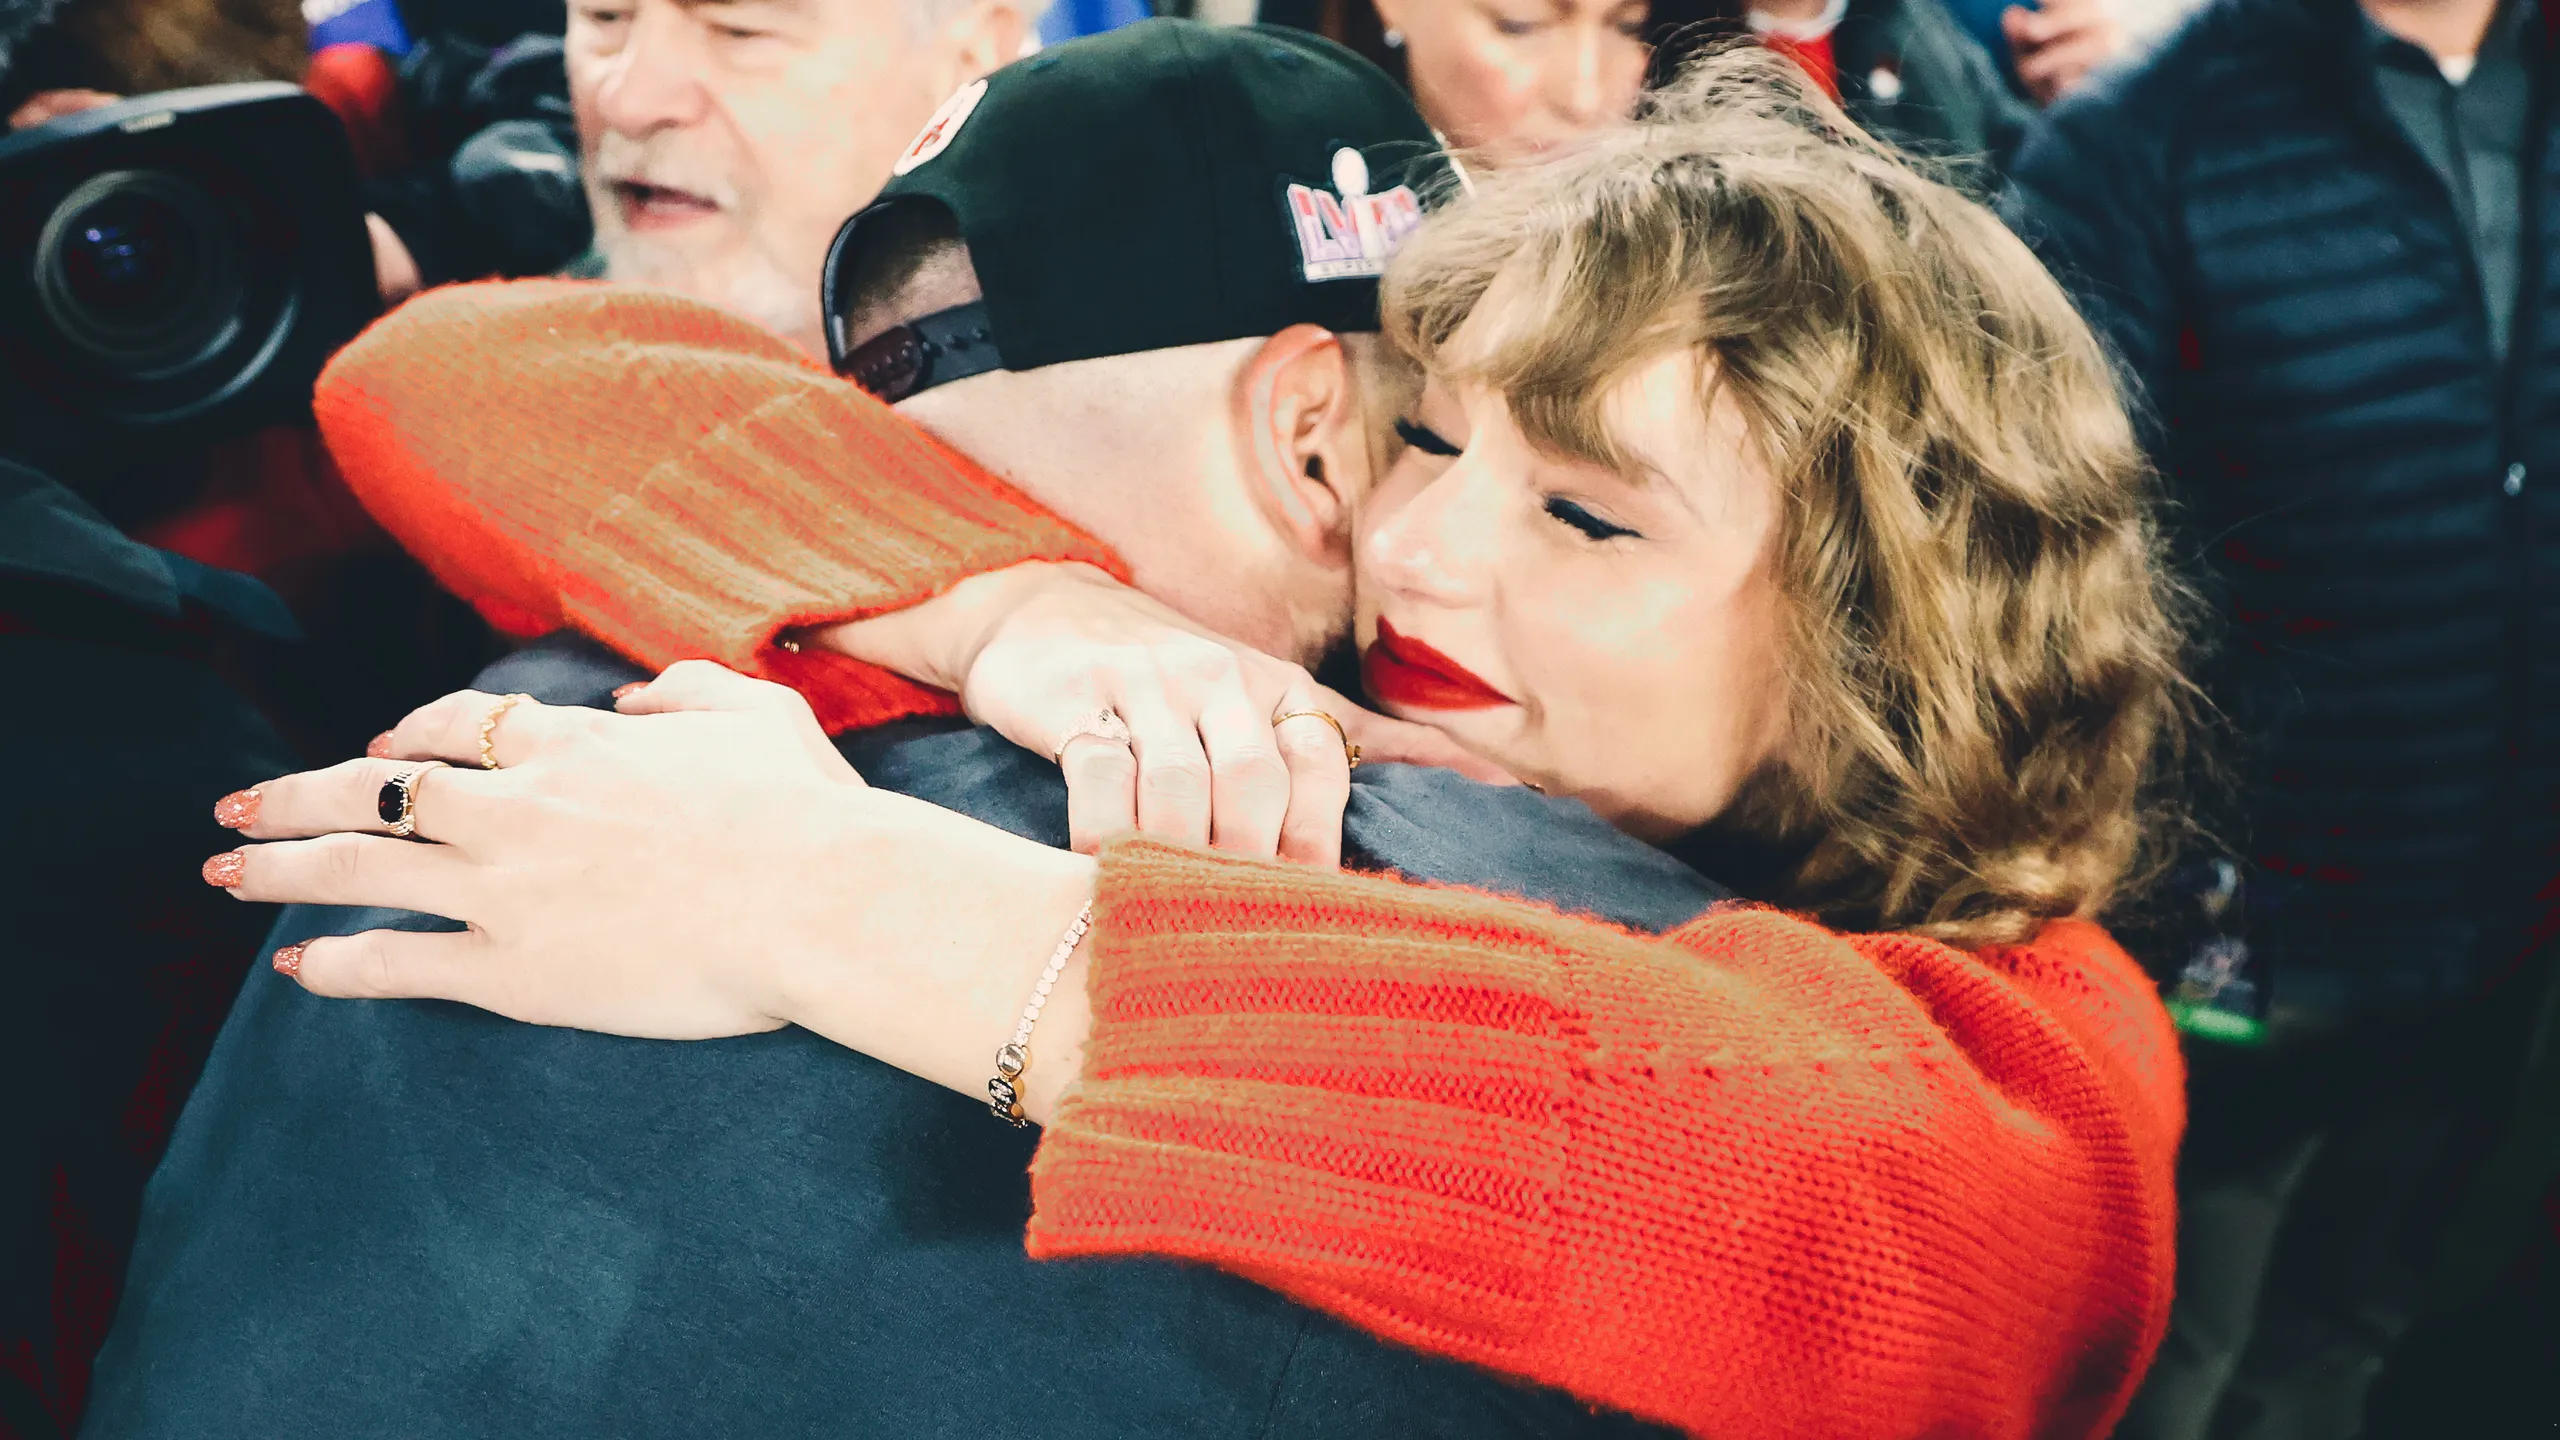 ' Sorry I couldn't hold Back the sweet secrets' Overwhelmed Taylor swift Mom Andrea disclosed what Travis Kelce told her 3 days age about engaging  her daughter ; You’re the best spider-slaying, garbage tossing husband there is! 